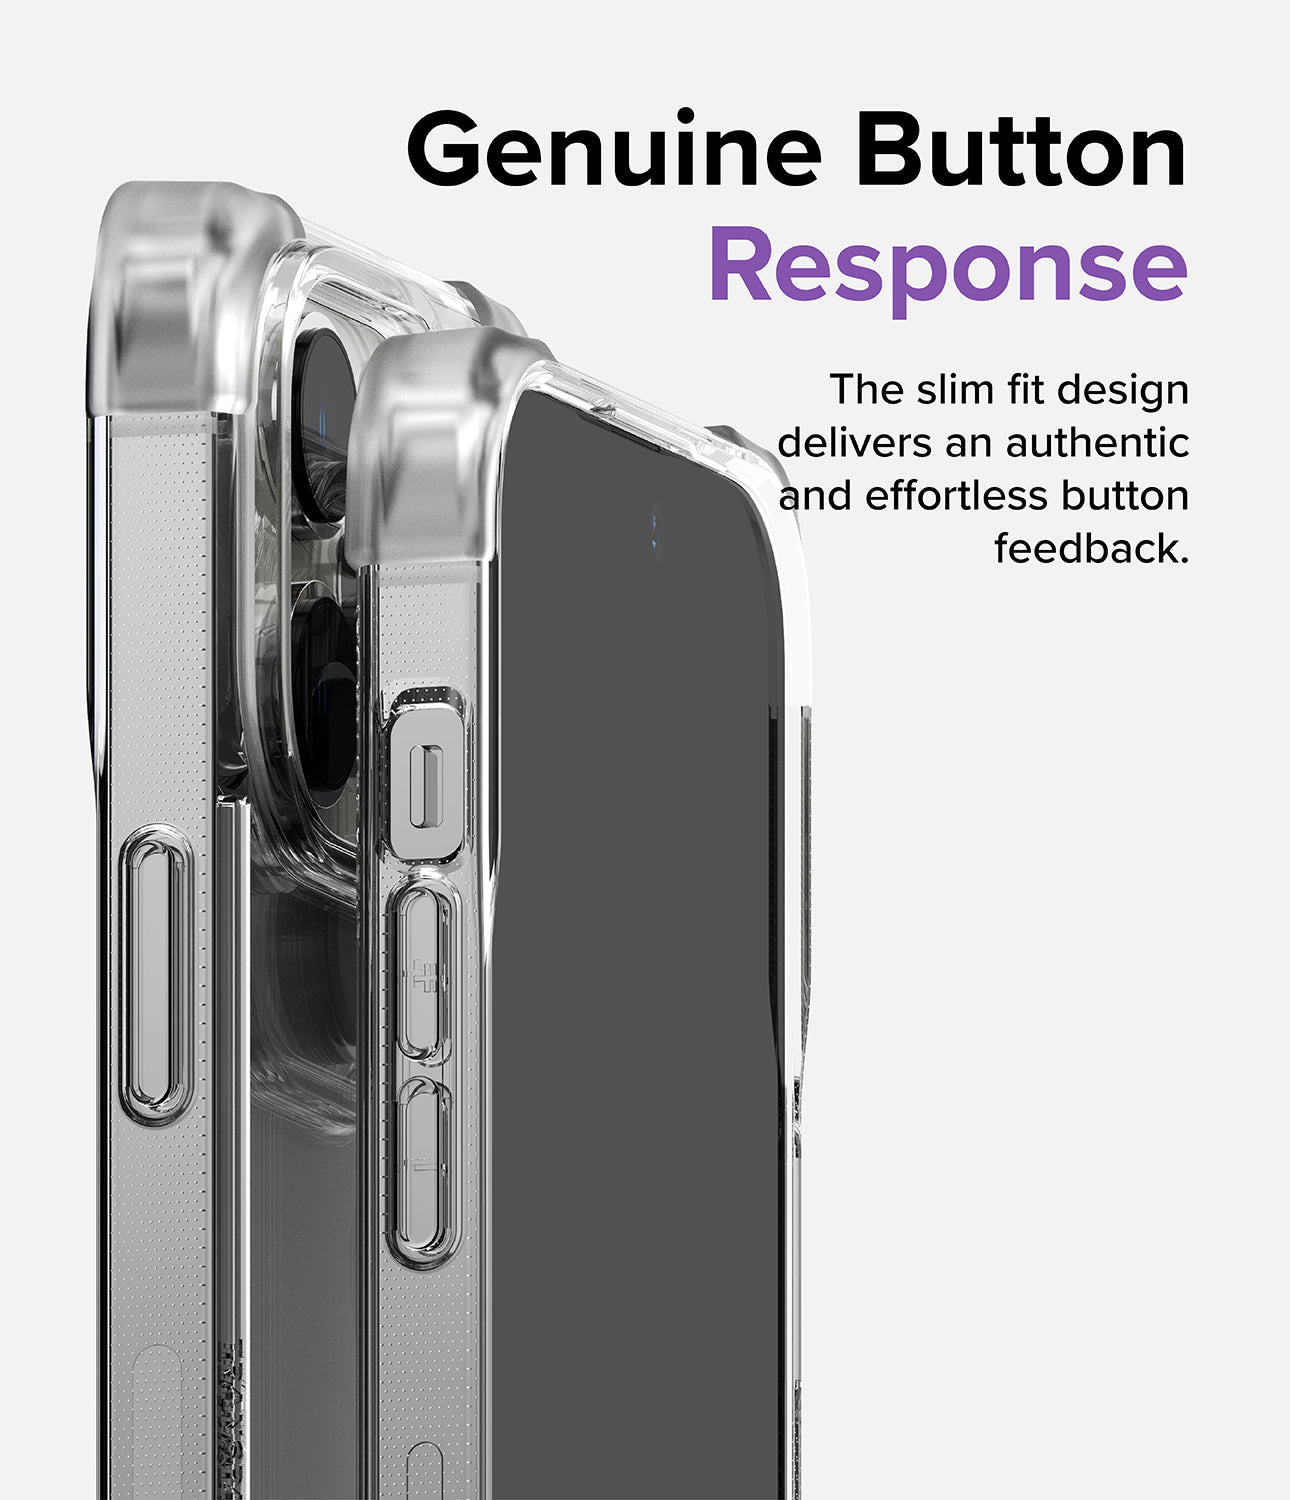 iPhone 14 Pro Max Bumper 2.0 - SHOCKLAYER